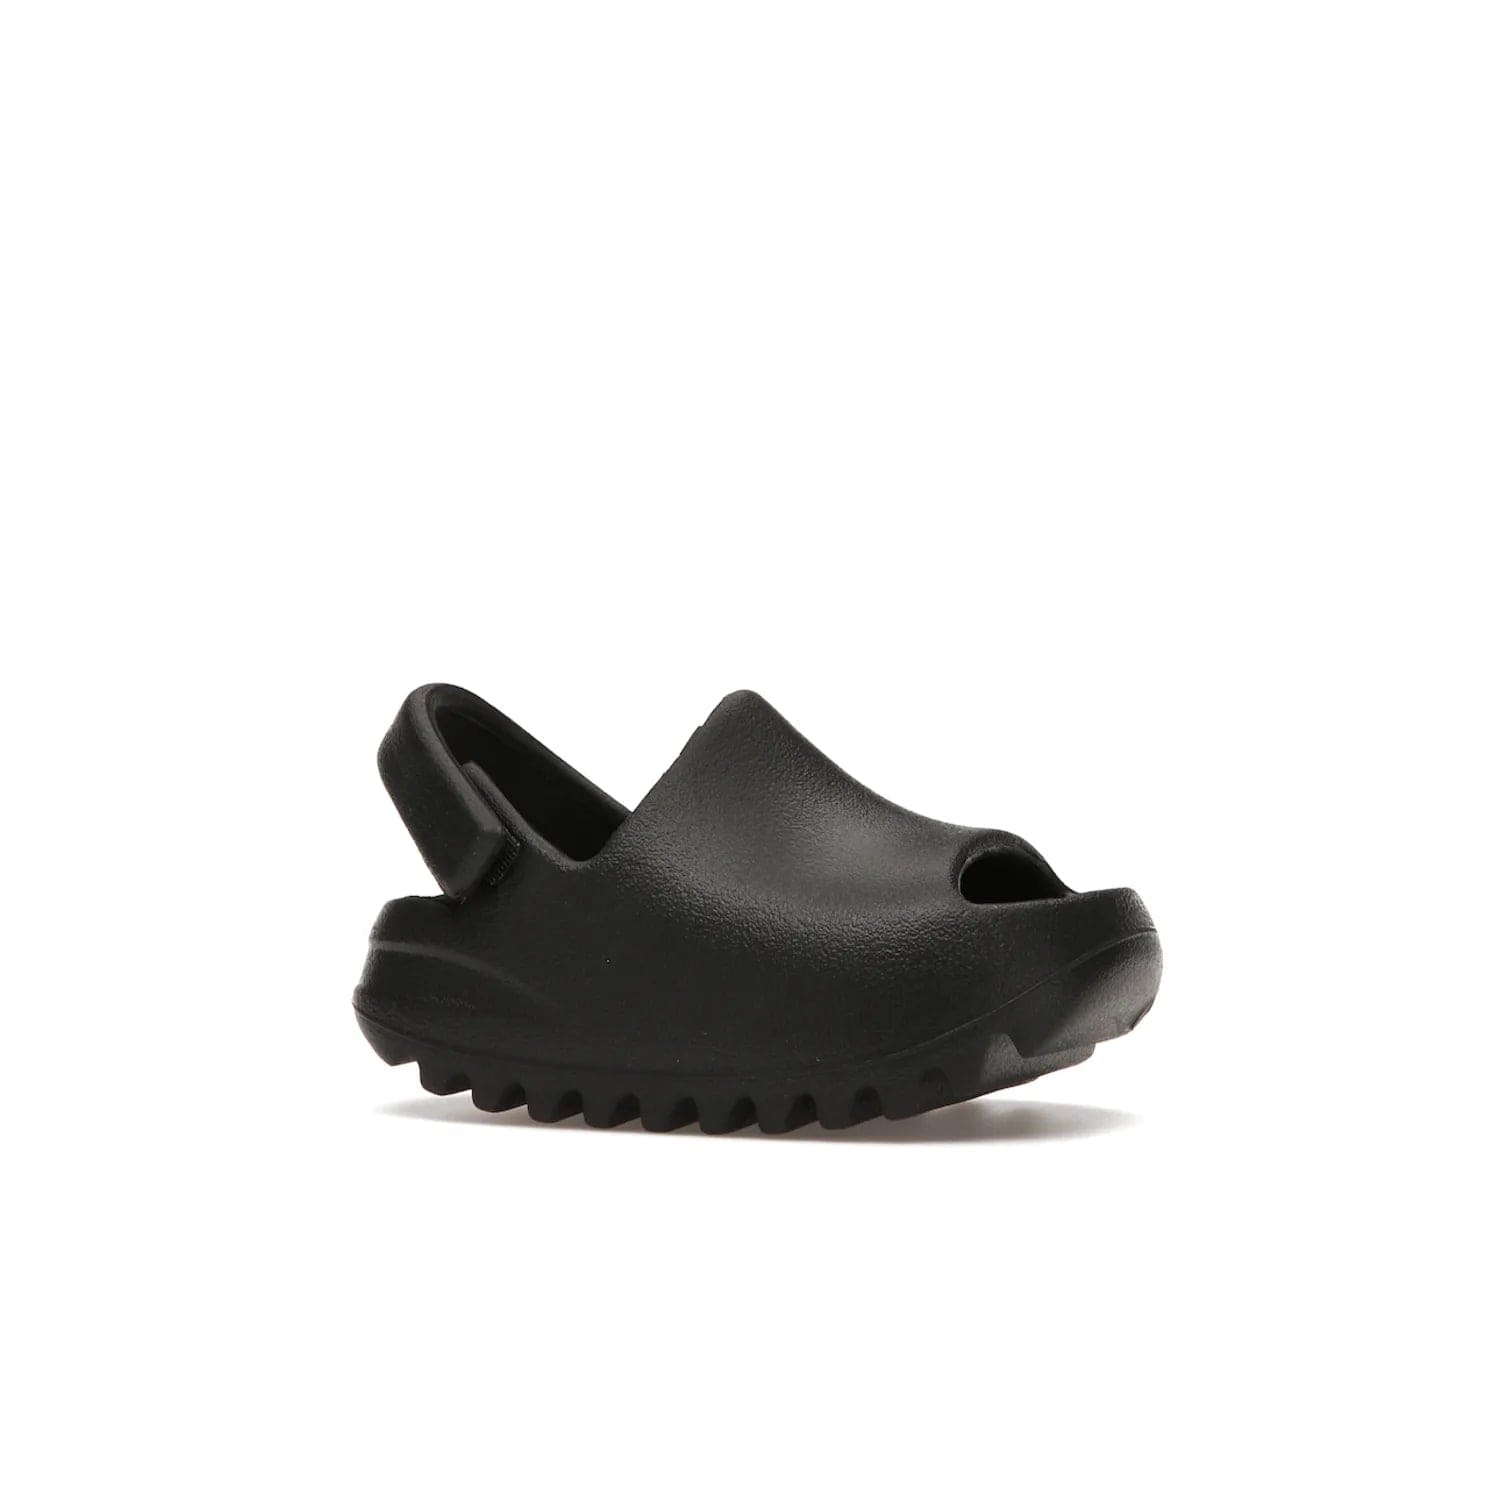 adidas Yeezy Slide Onyx (Infants) - Image 3 - Only at www.BallersClubKickz.com - The Adidas Yeezy Slide Onyx (Infant) is a classic silhouette with unique features and durable EVA foam. Released in May 2021 with a starting price of $70, it's no wonder it quickly gained popularity with its cool, minimalist look.